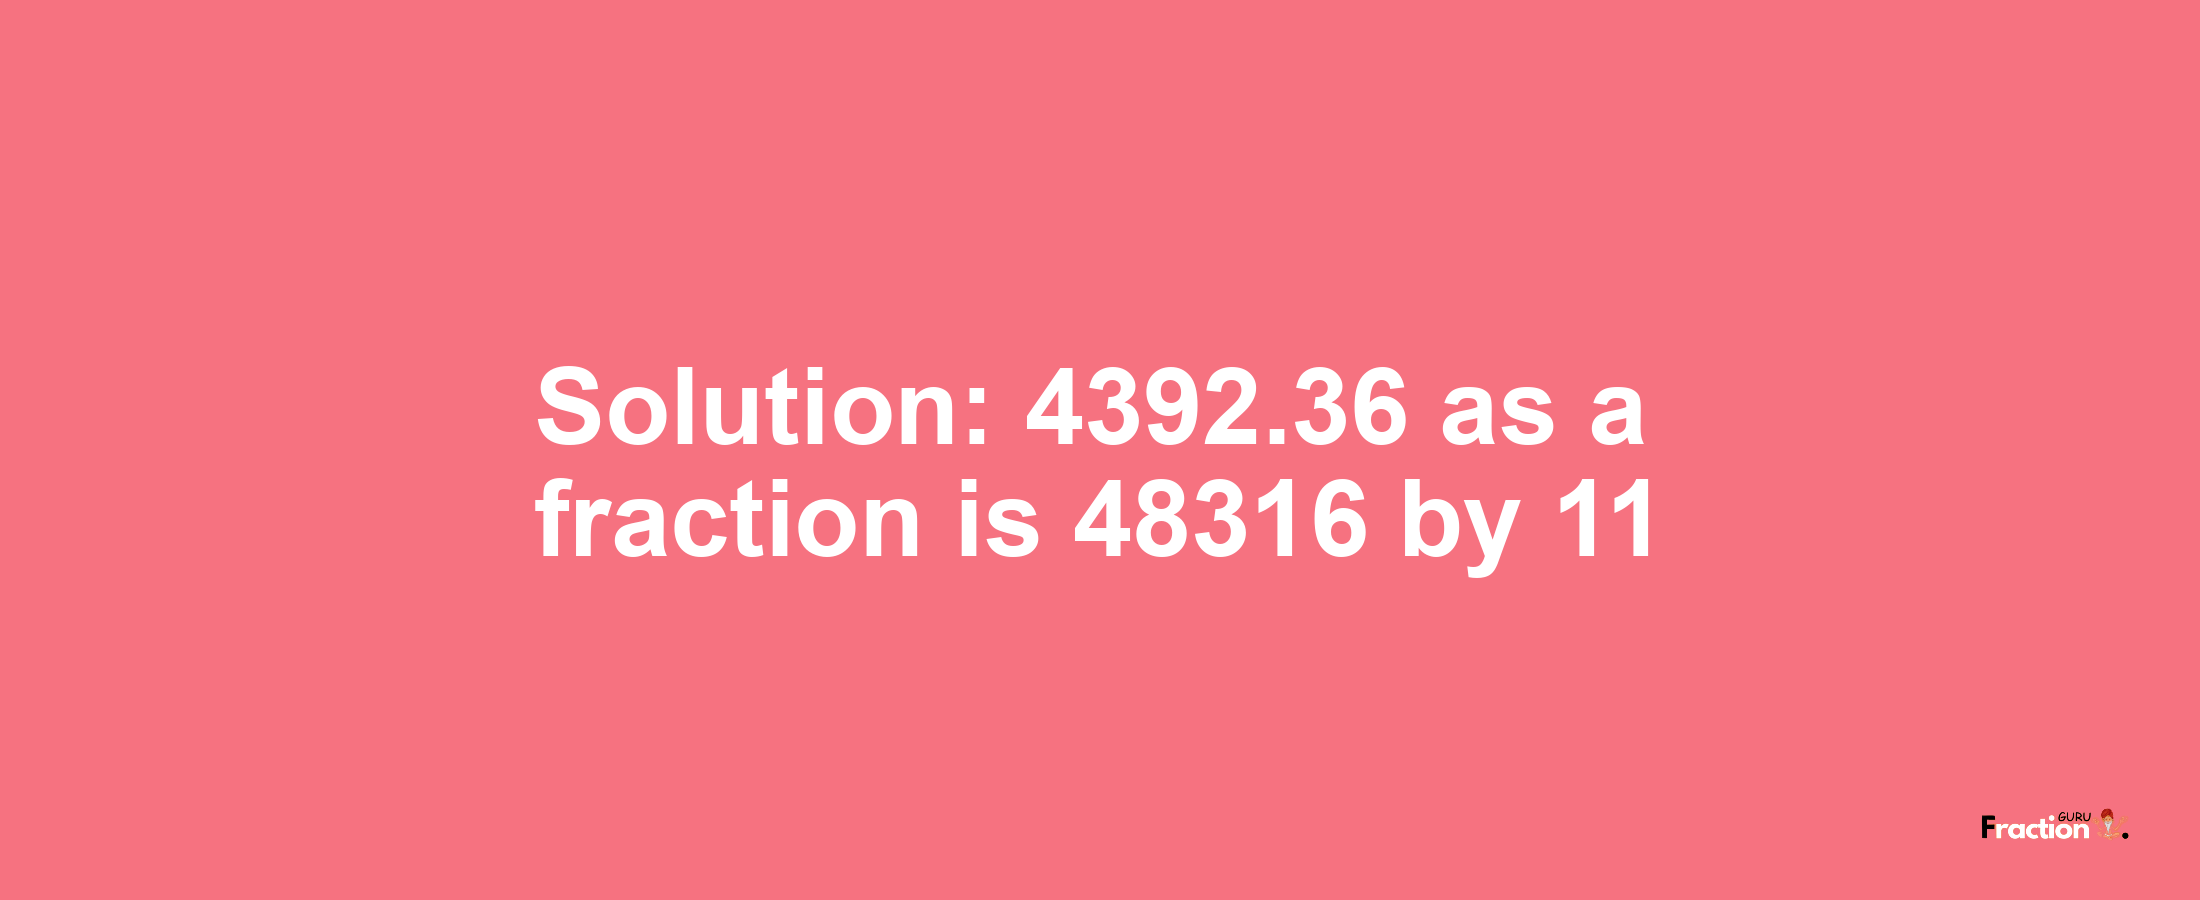 Solution:4392.36 as a fraction is 48316/11